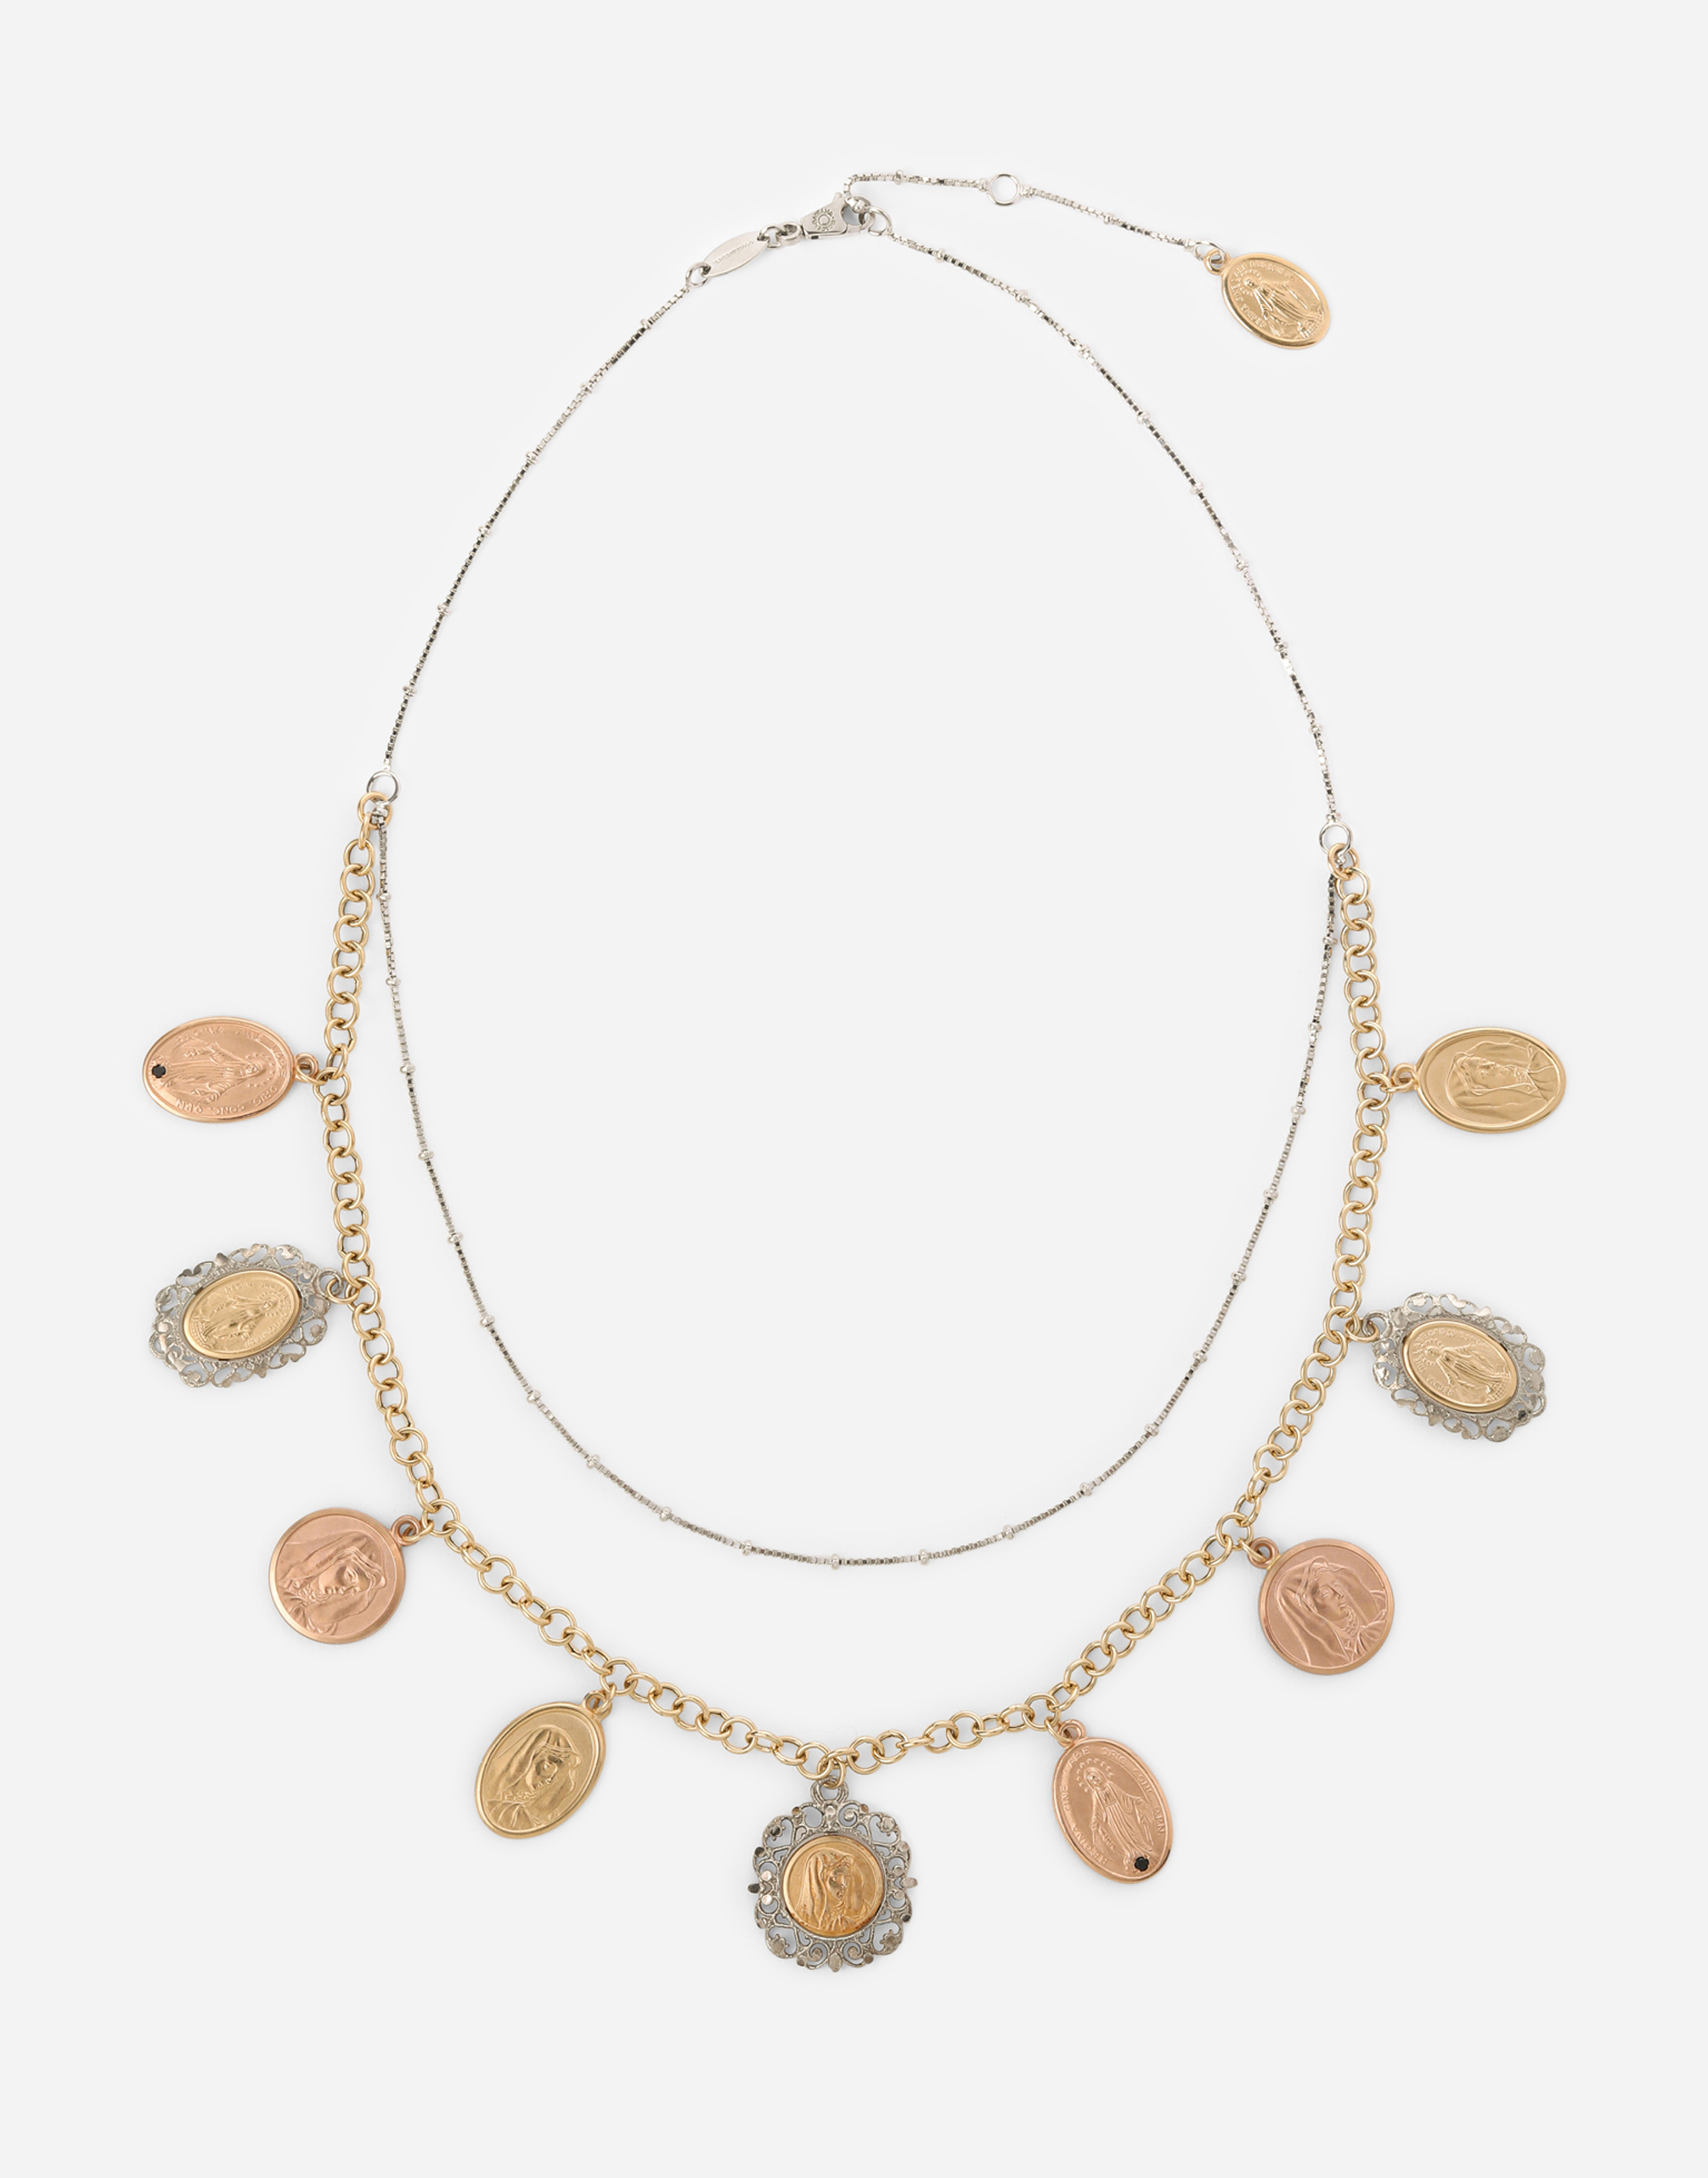 Sicily necklace in yellow, red and white 18kt gold with medals in Multicolor